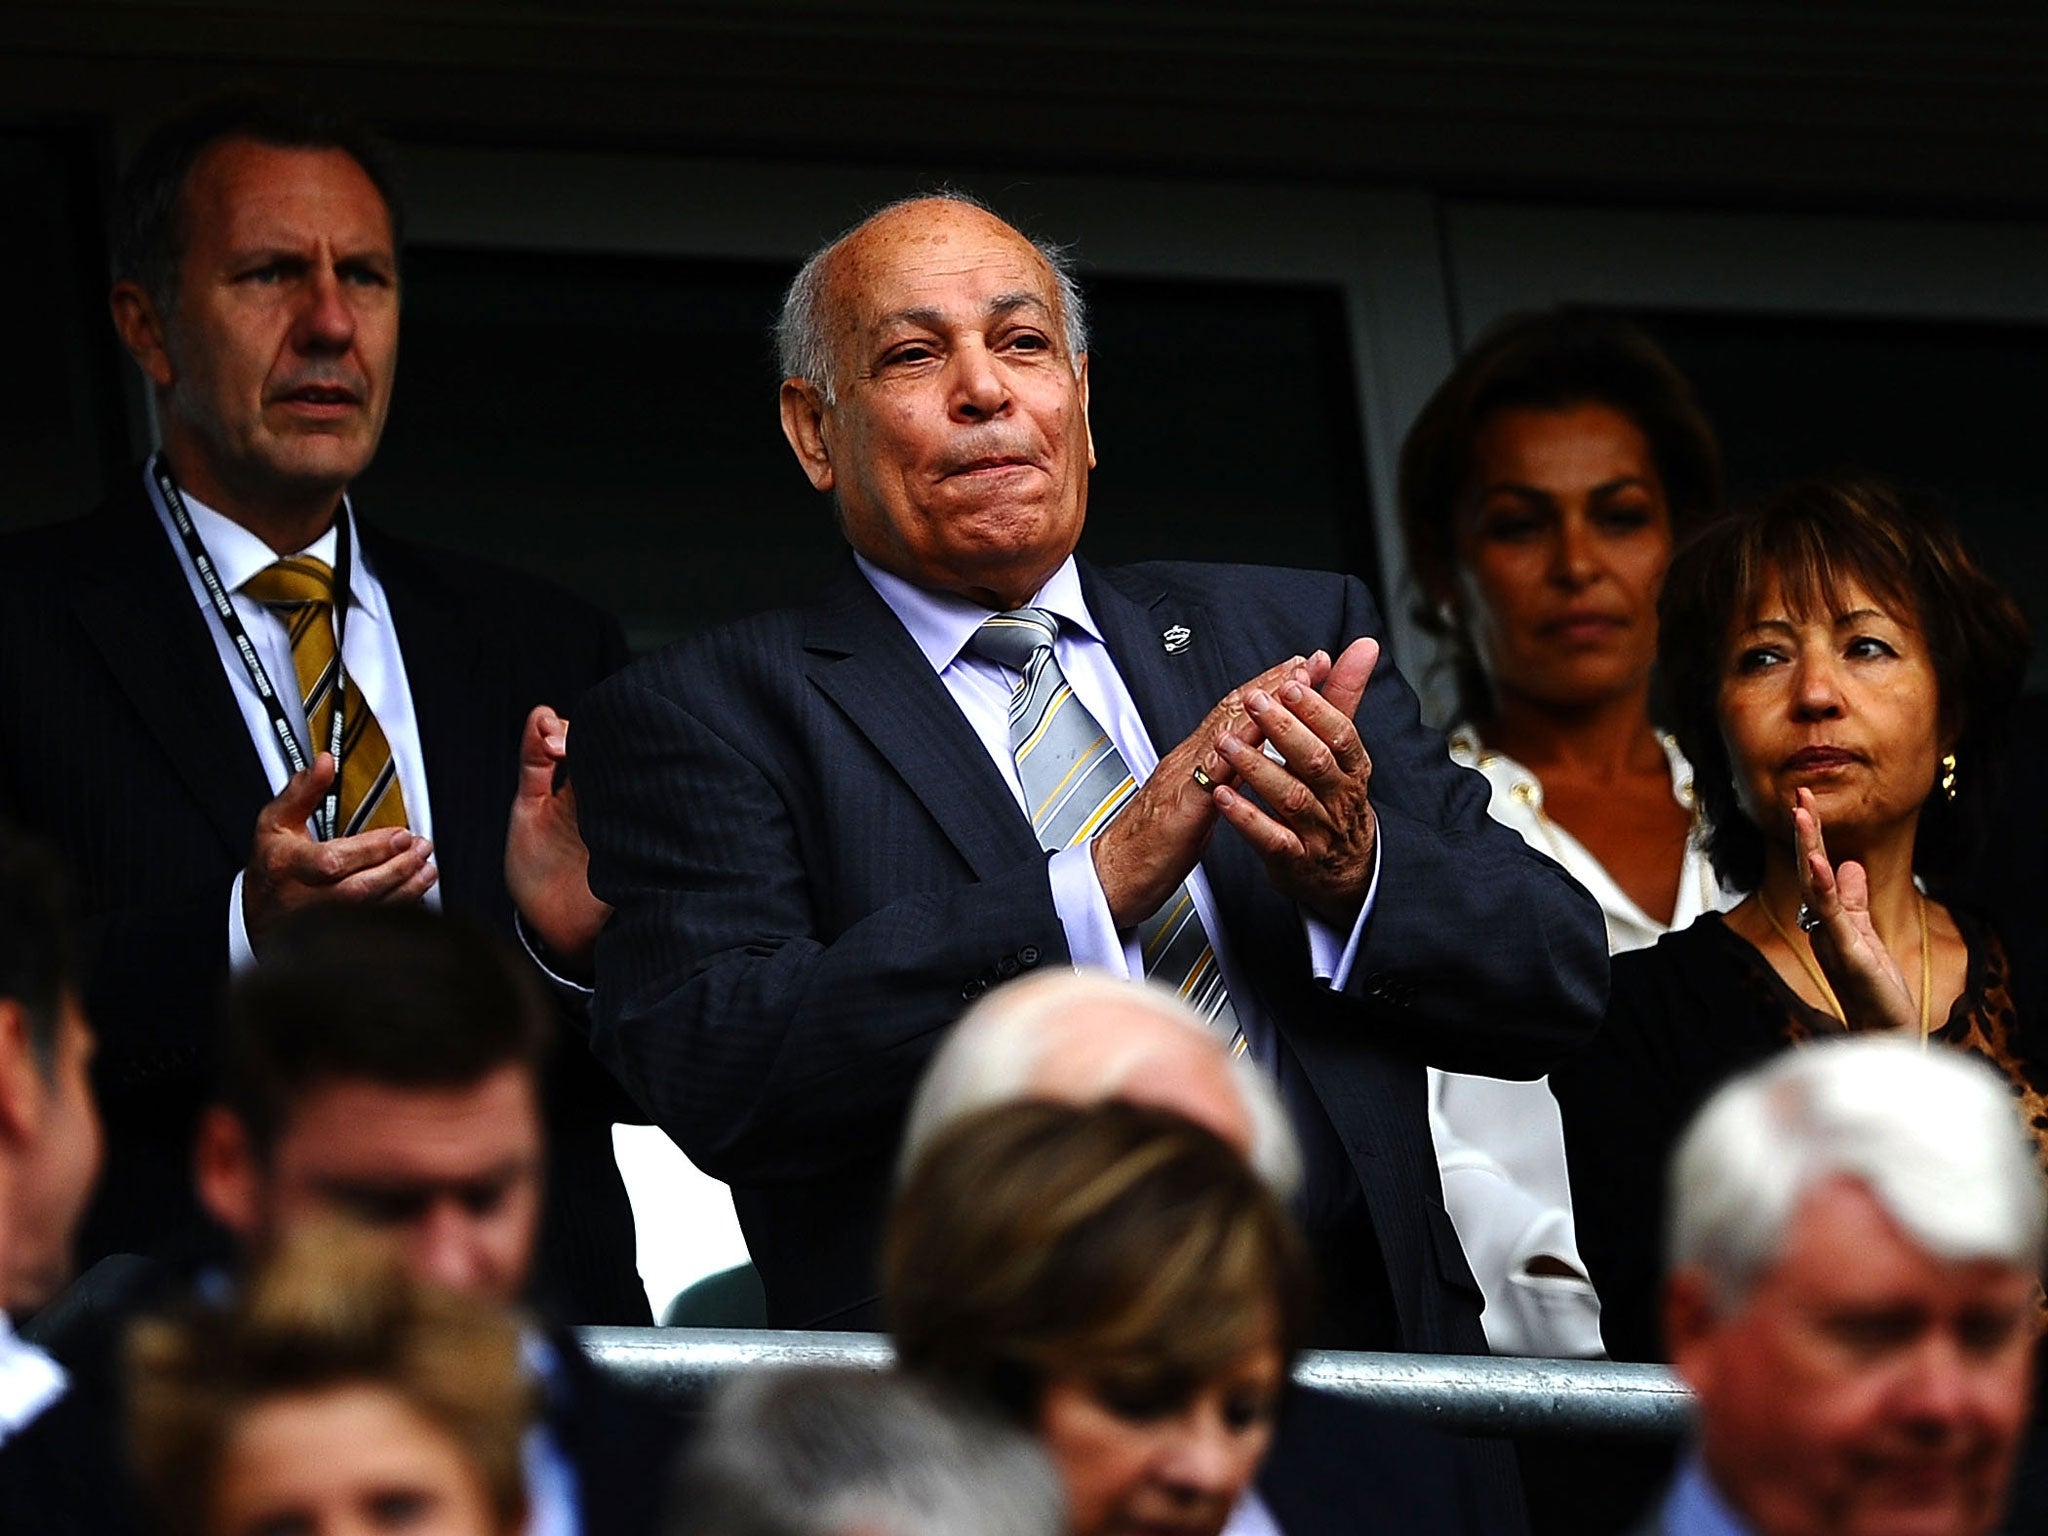 Hull City owner Assem Allam has reaffirmed his desire to change the club's name to the Hull City Tigers